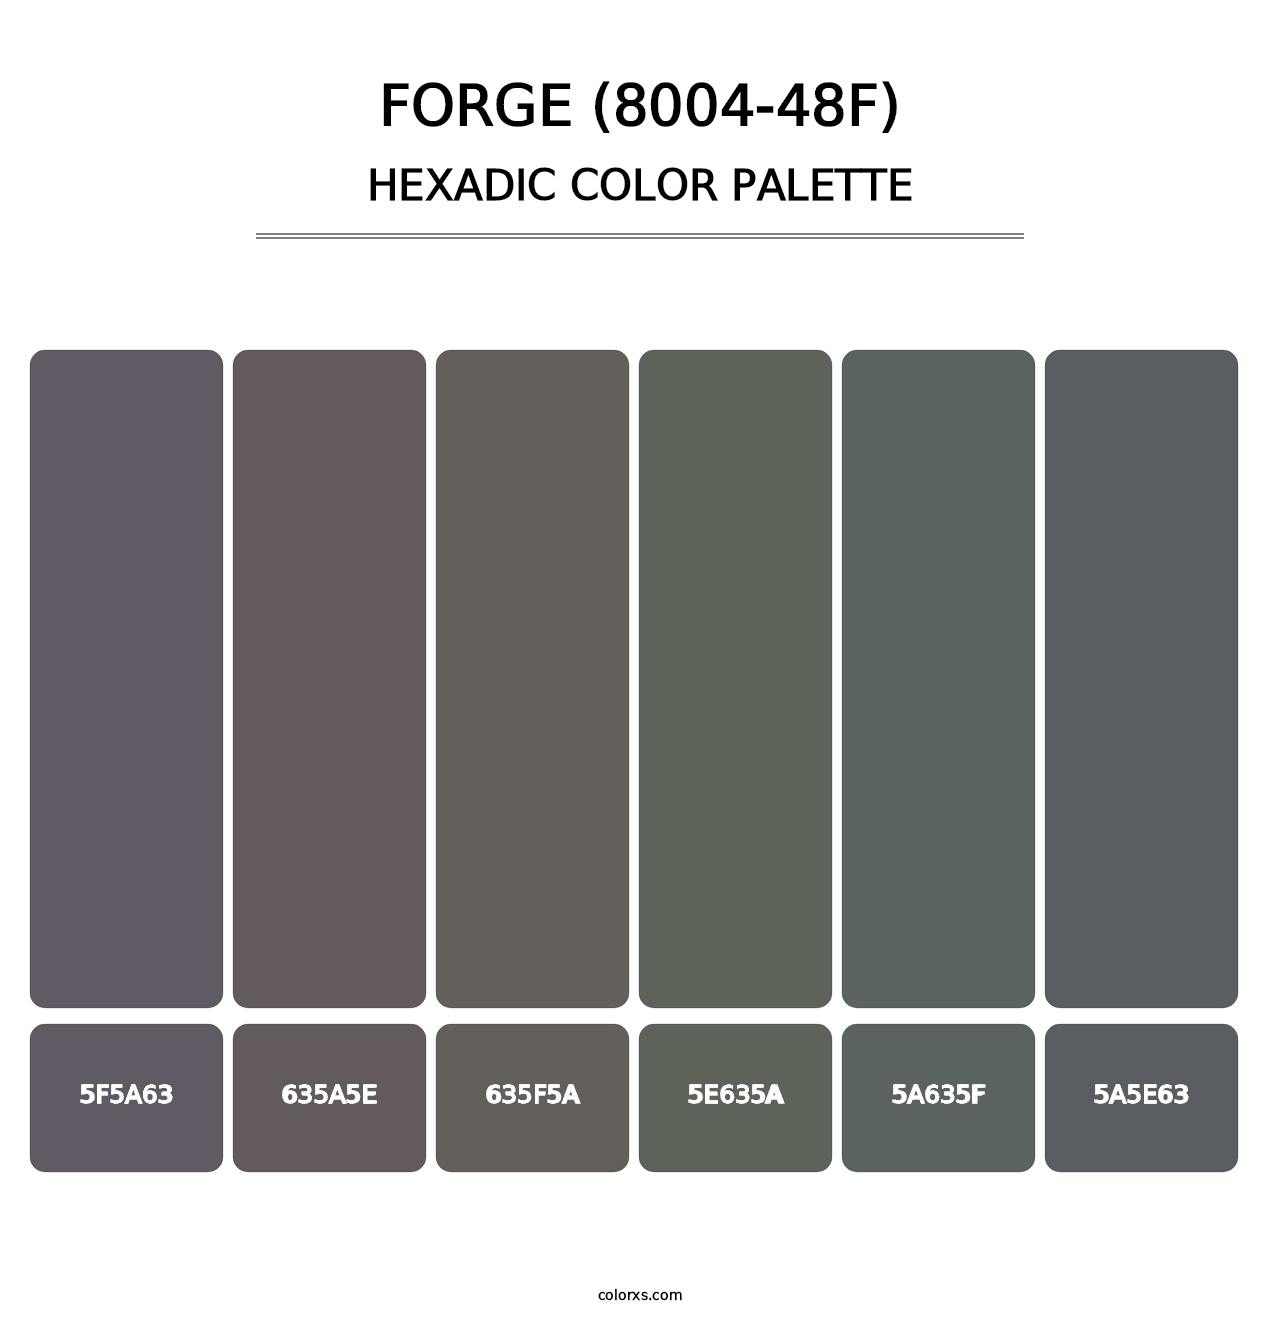 Forge (8004-48F) - Hexadic Color Palette